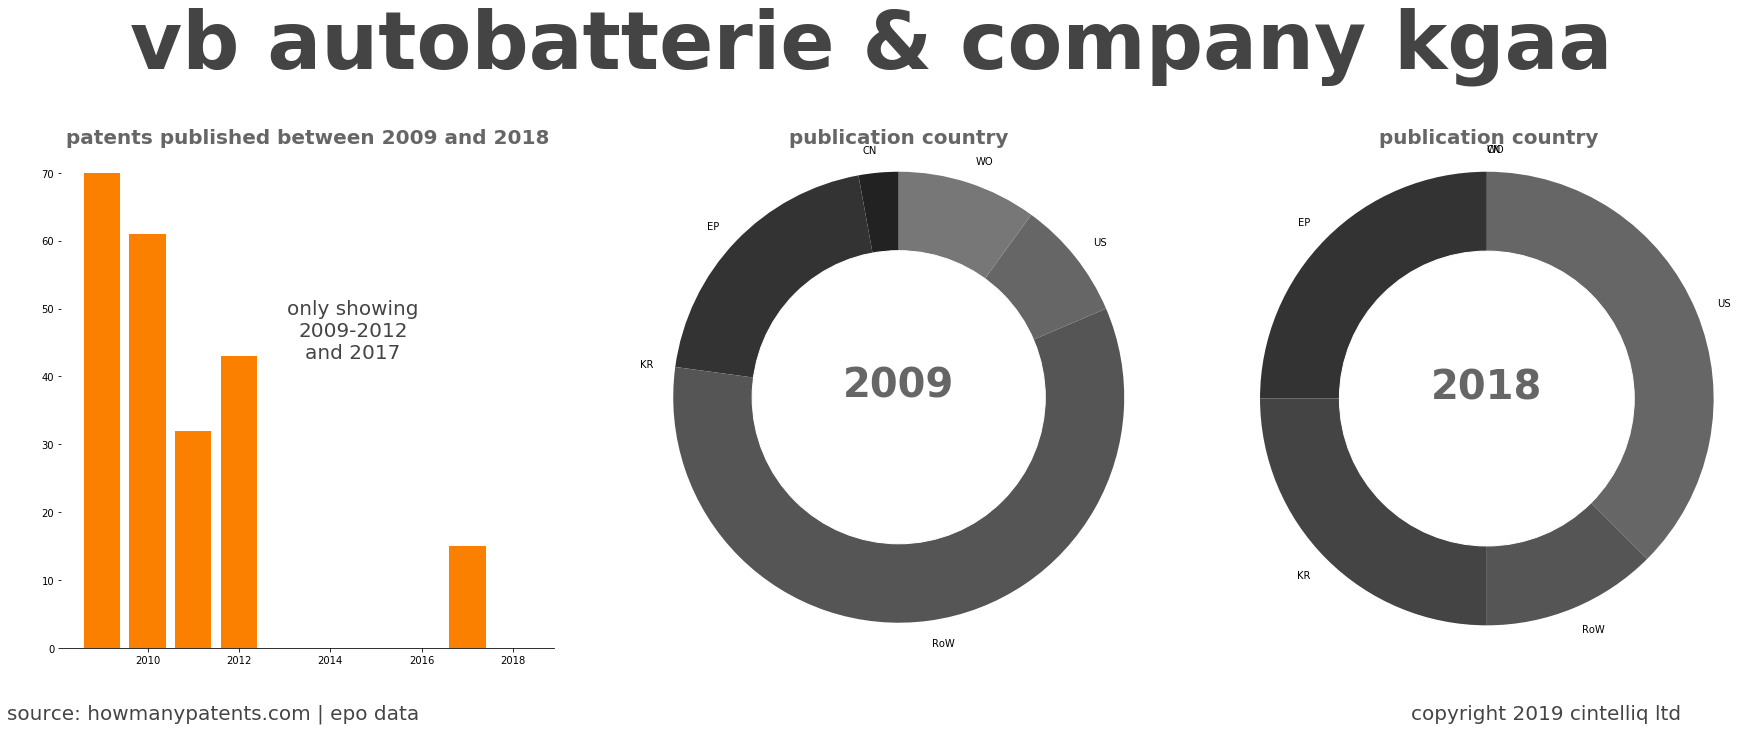 summary of patents for Vb Autobatterie & Company Kgaa